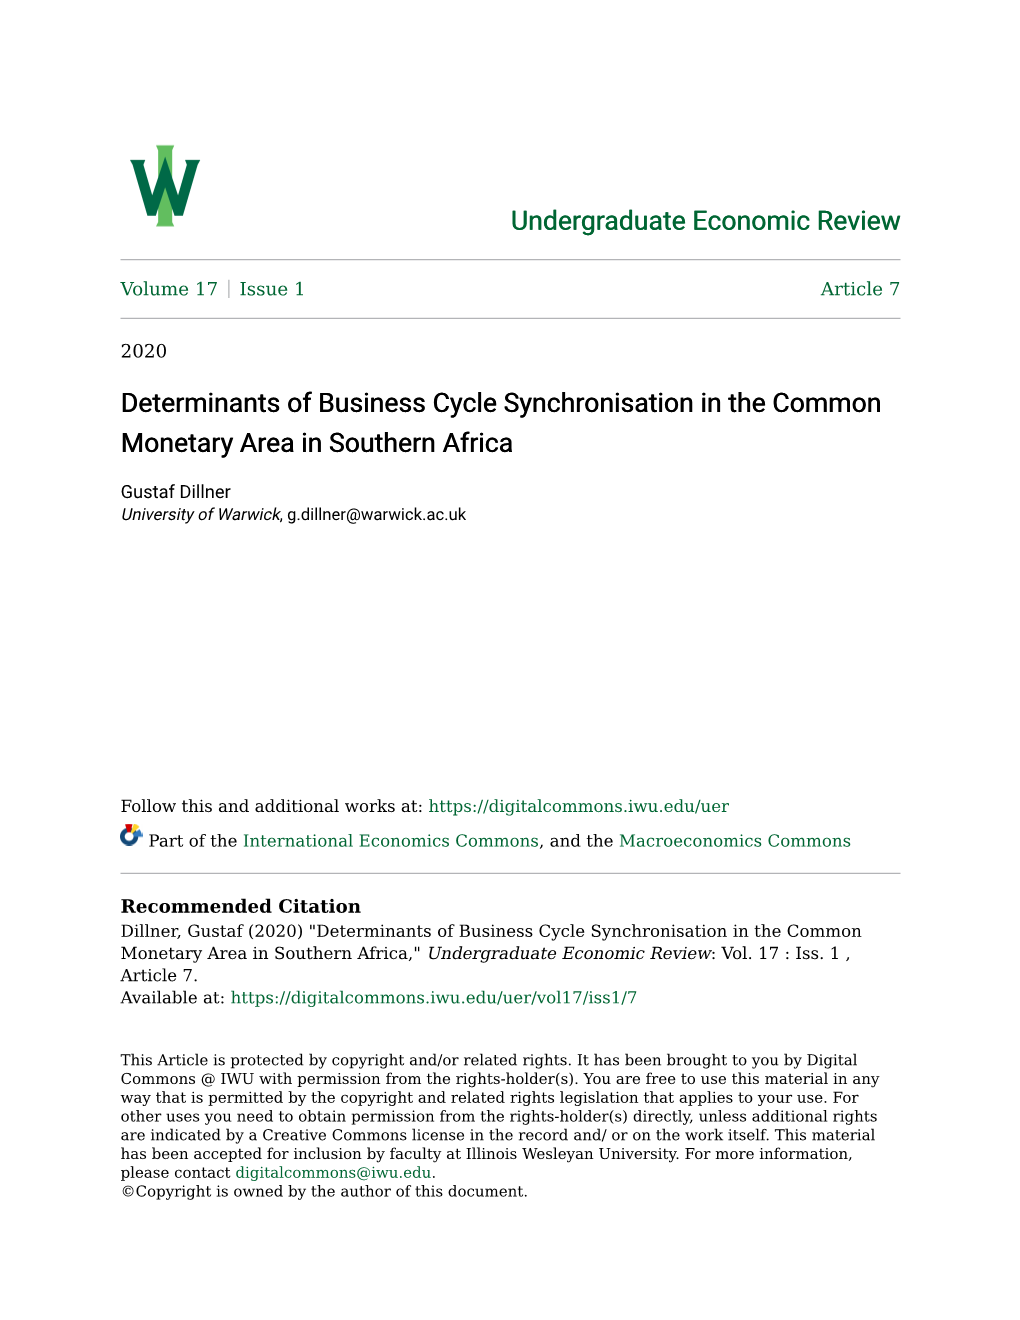 Determinants of Business Cycle Synchronisation in the Common Monetary Area in Southern Africa